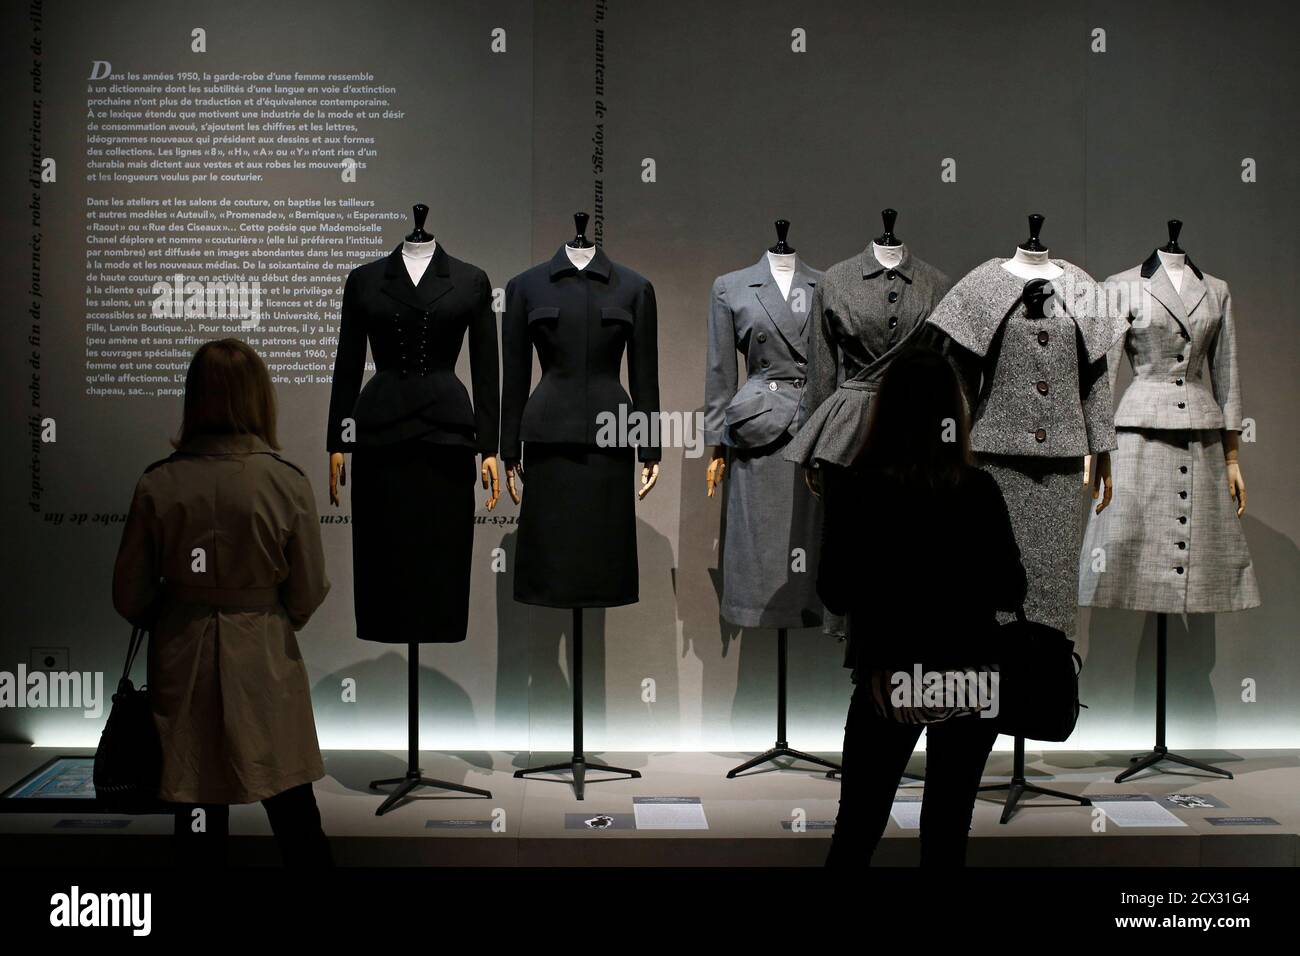 Visitors look at vintage dresses by designers Balenciaga, Christian Dior,  Pierre Cardin and Jacques Fath presented in the exhibition "Les Annees 50,  La mode en France" (The 50s. Fashion in France, 1947-1957)